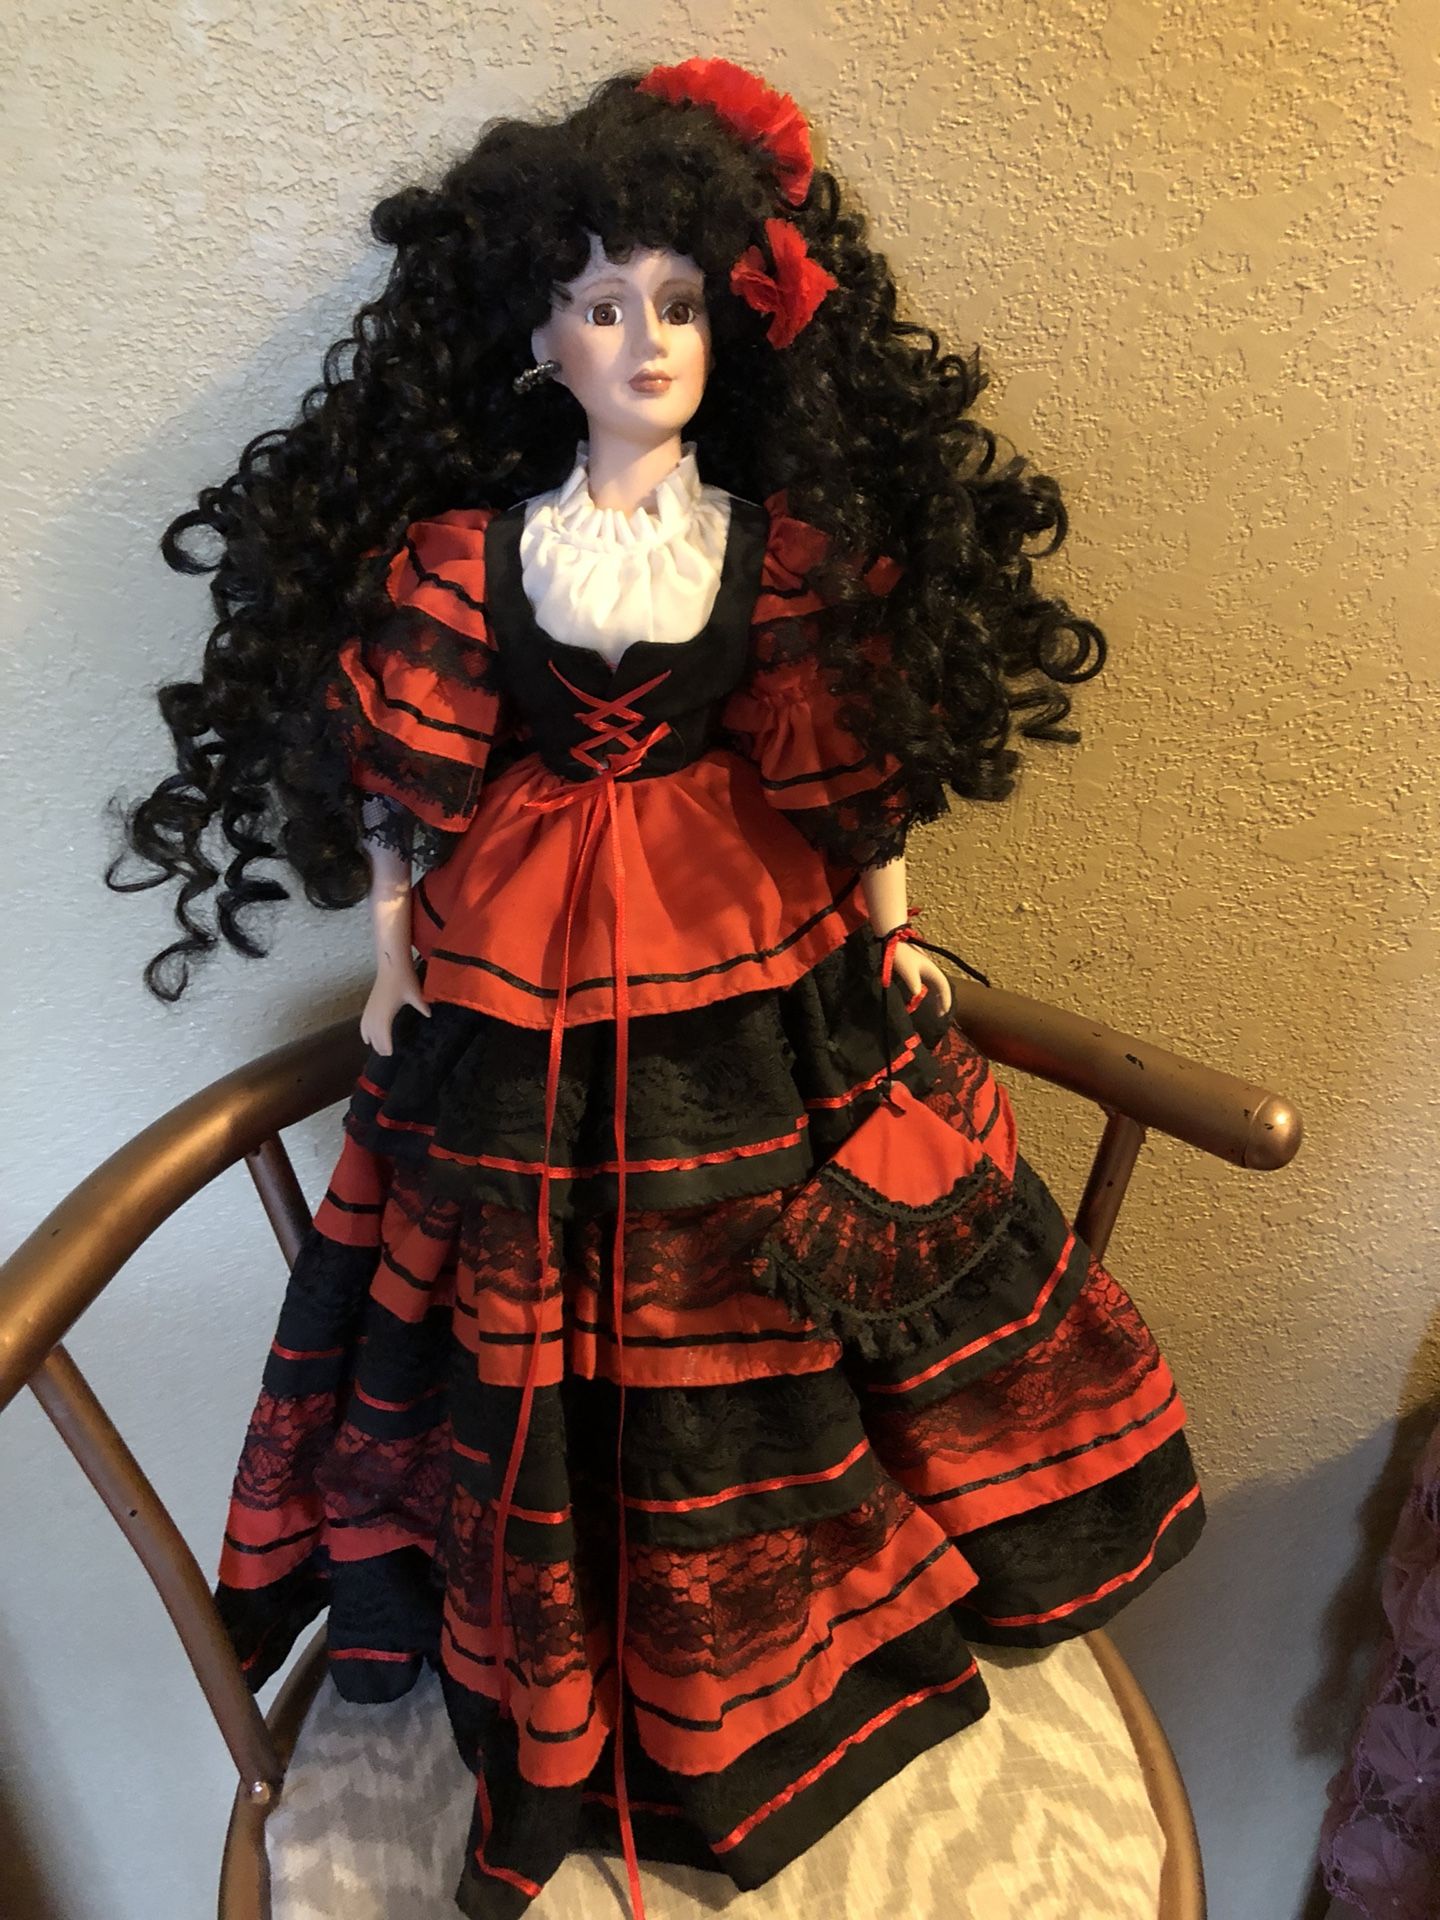 Swam collection vintage doll 22” long $15